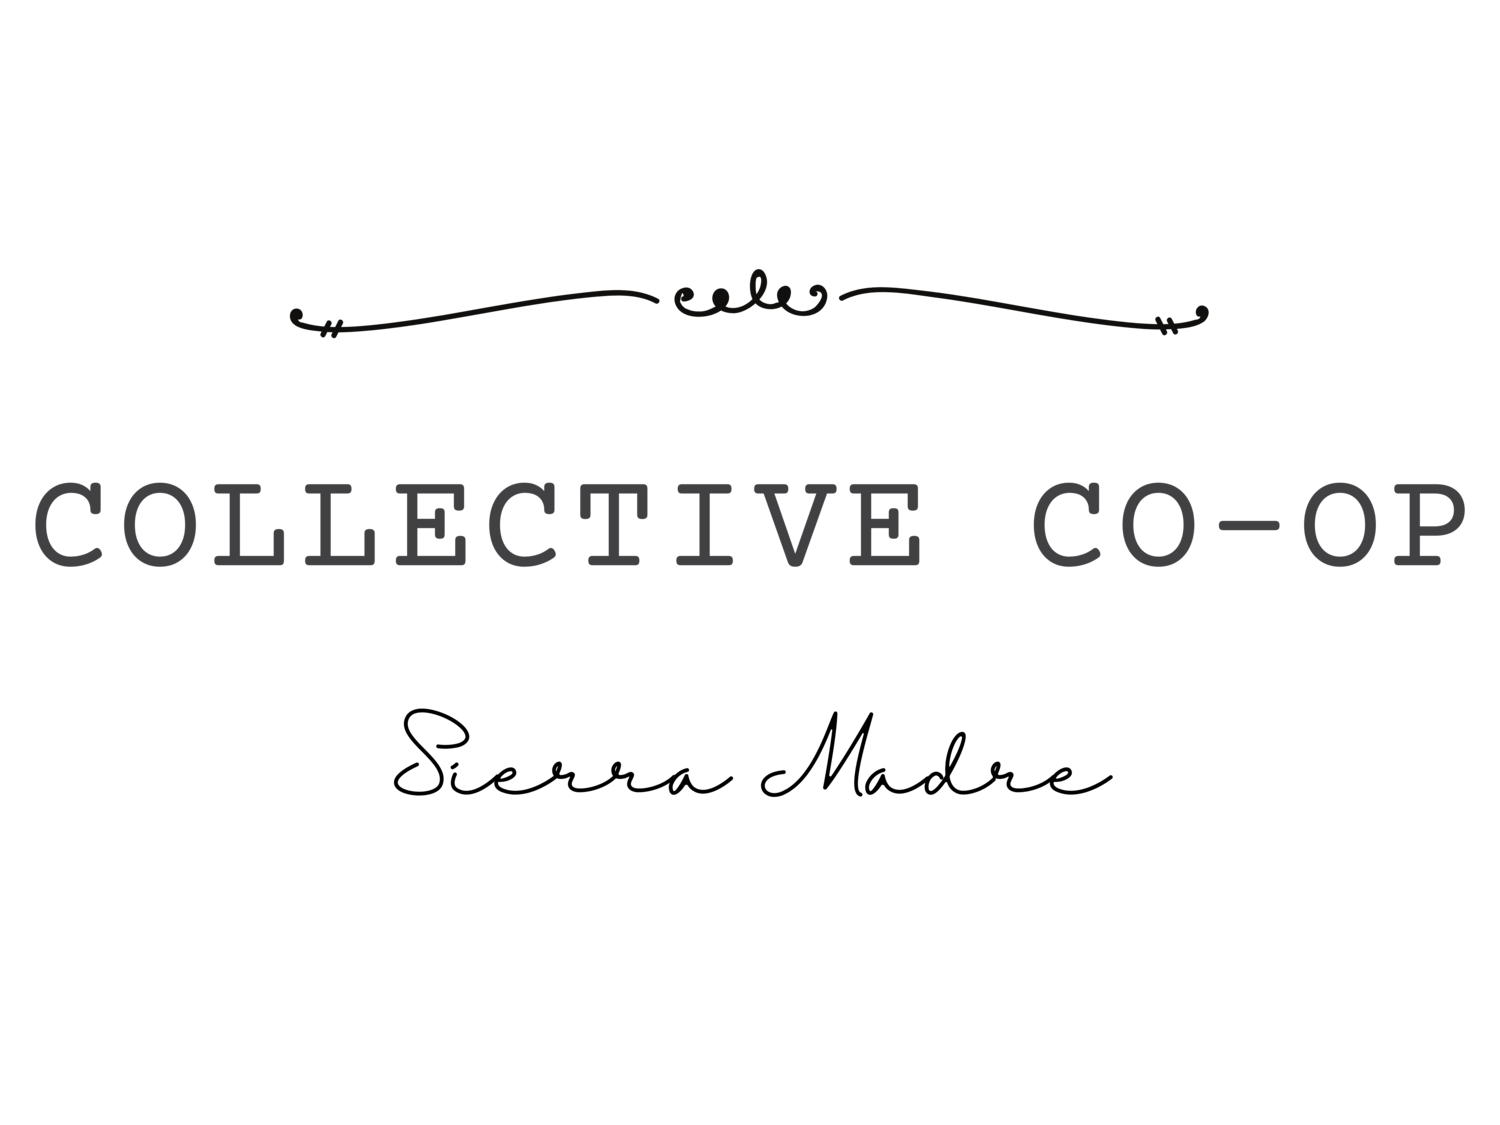 Collective Co-op